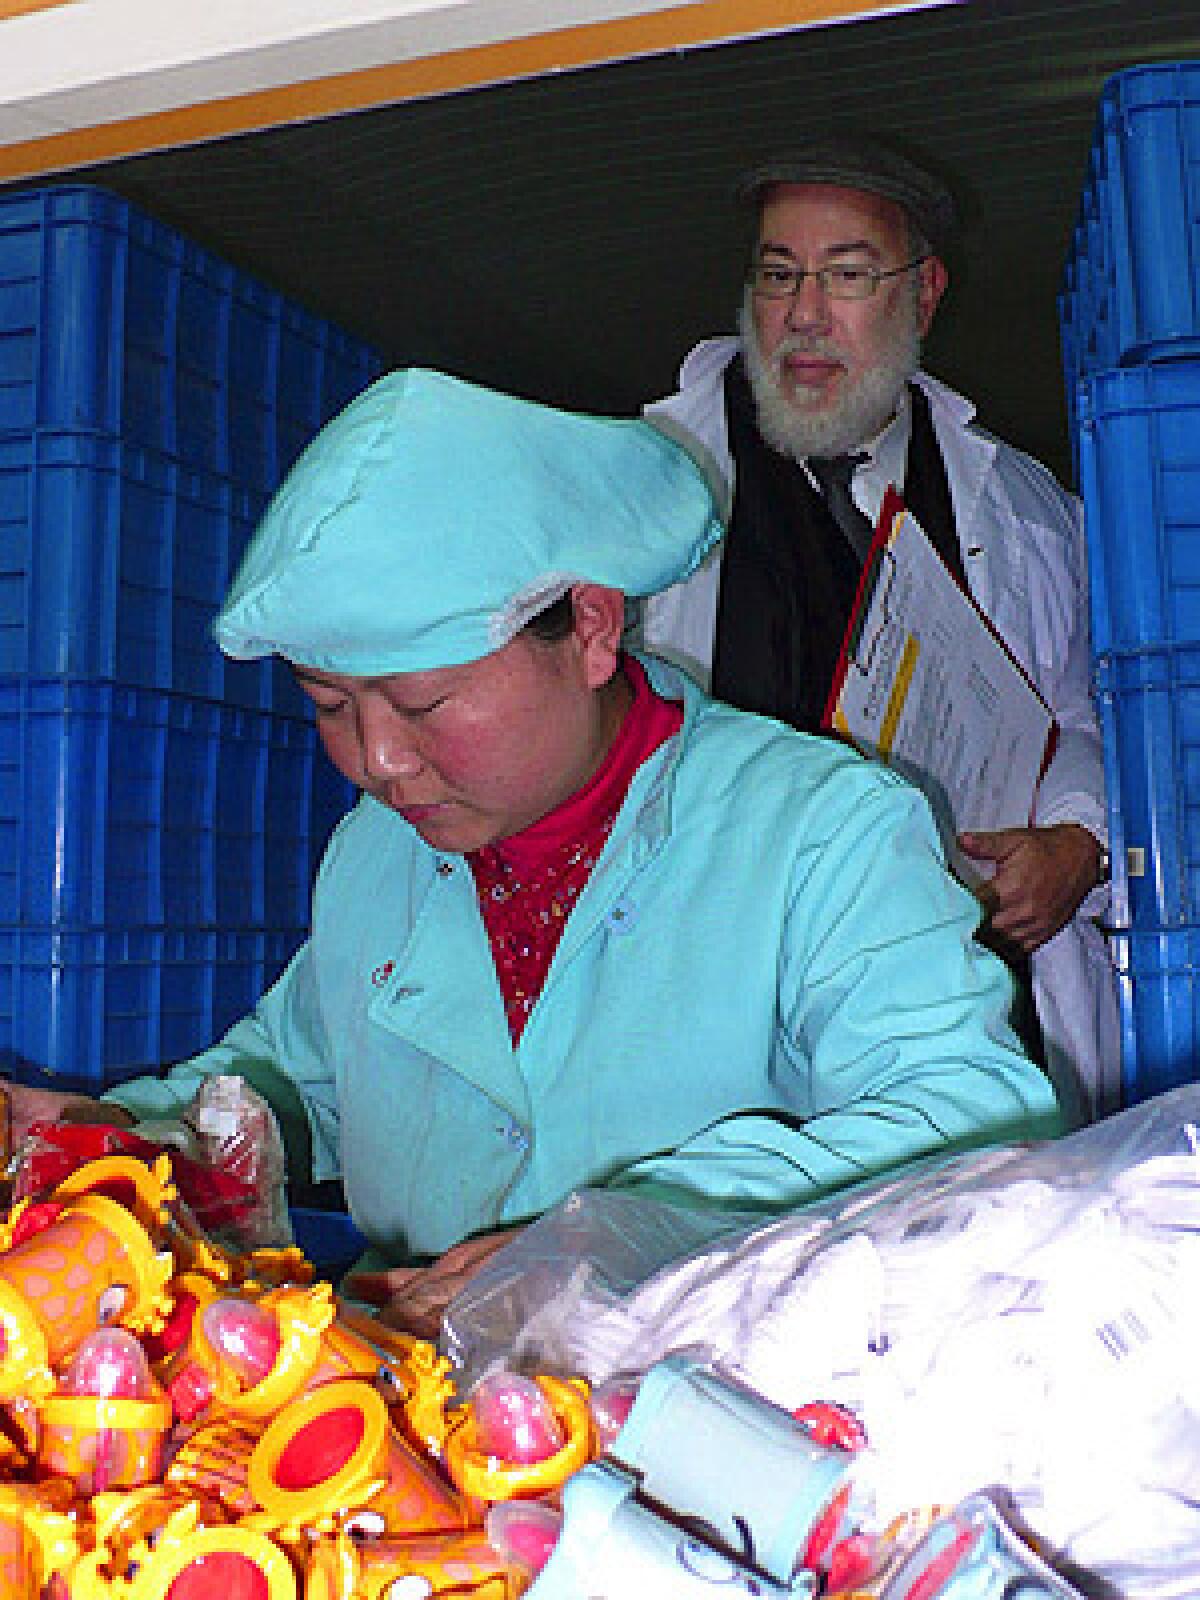 Rabbi Martin Grunberg is one of a small group of kosher food inspectors who watches over factory workers in China, the world's fastest-growing producer of kosher-certified products. Here he is on a maintenance tour of a Chinese candy factory making kosher-certified toy candies, most of it for export to the U.S. and Israel.